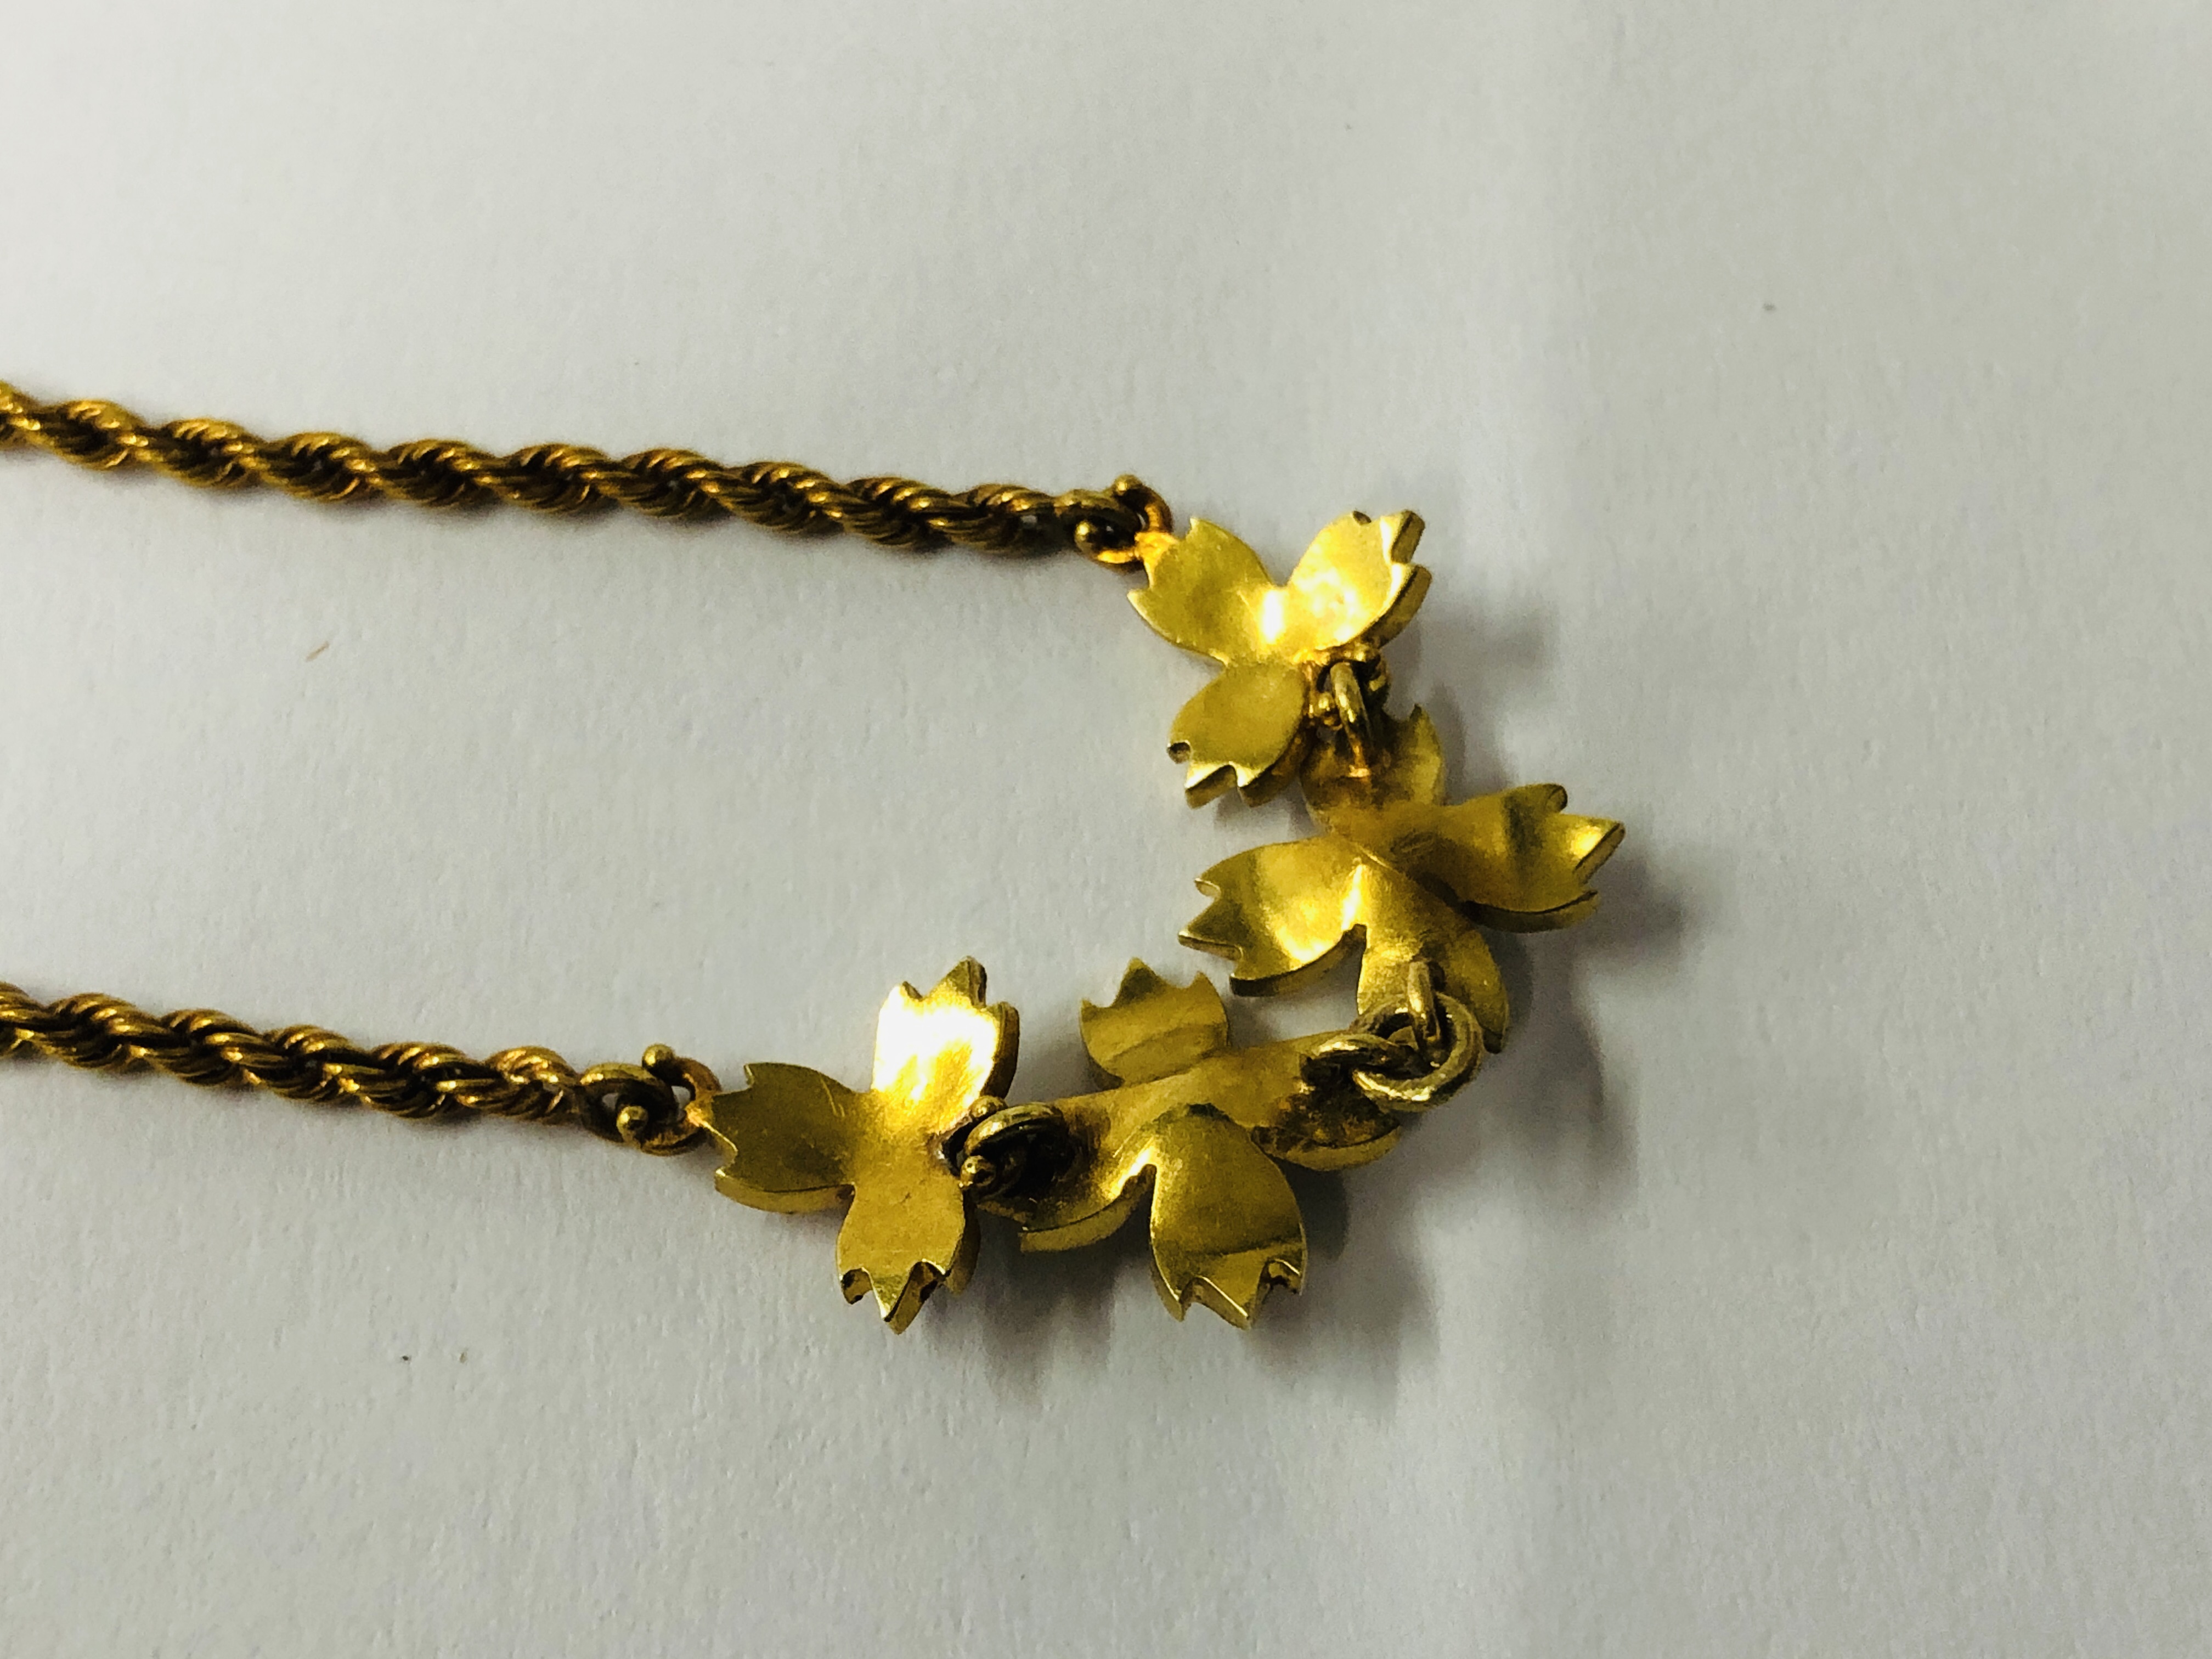 AN ANTIQUE CHILD'S YELLOW METAL ROPE DESIGN NECKLACE SET WITH SEED PEARLS, LENGTH 31CM. - Image 6 of 9